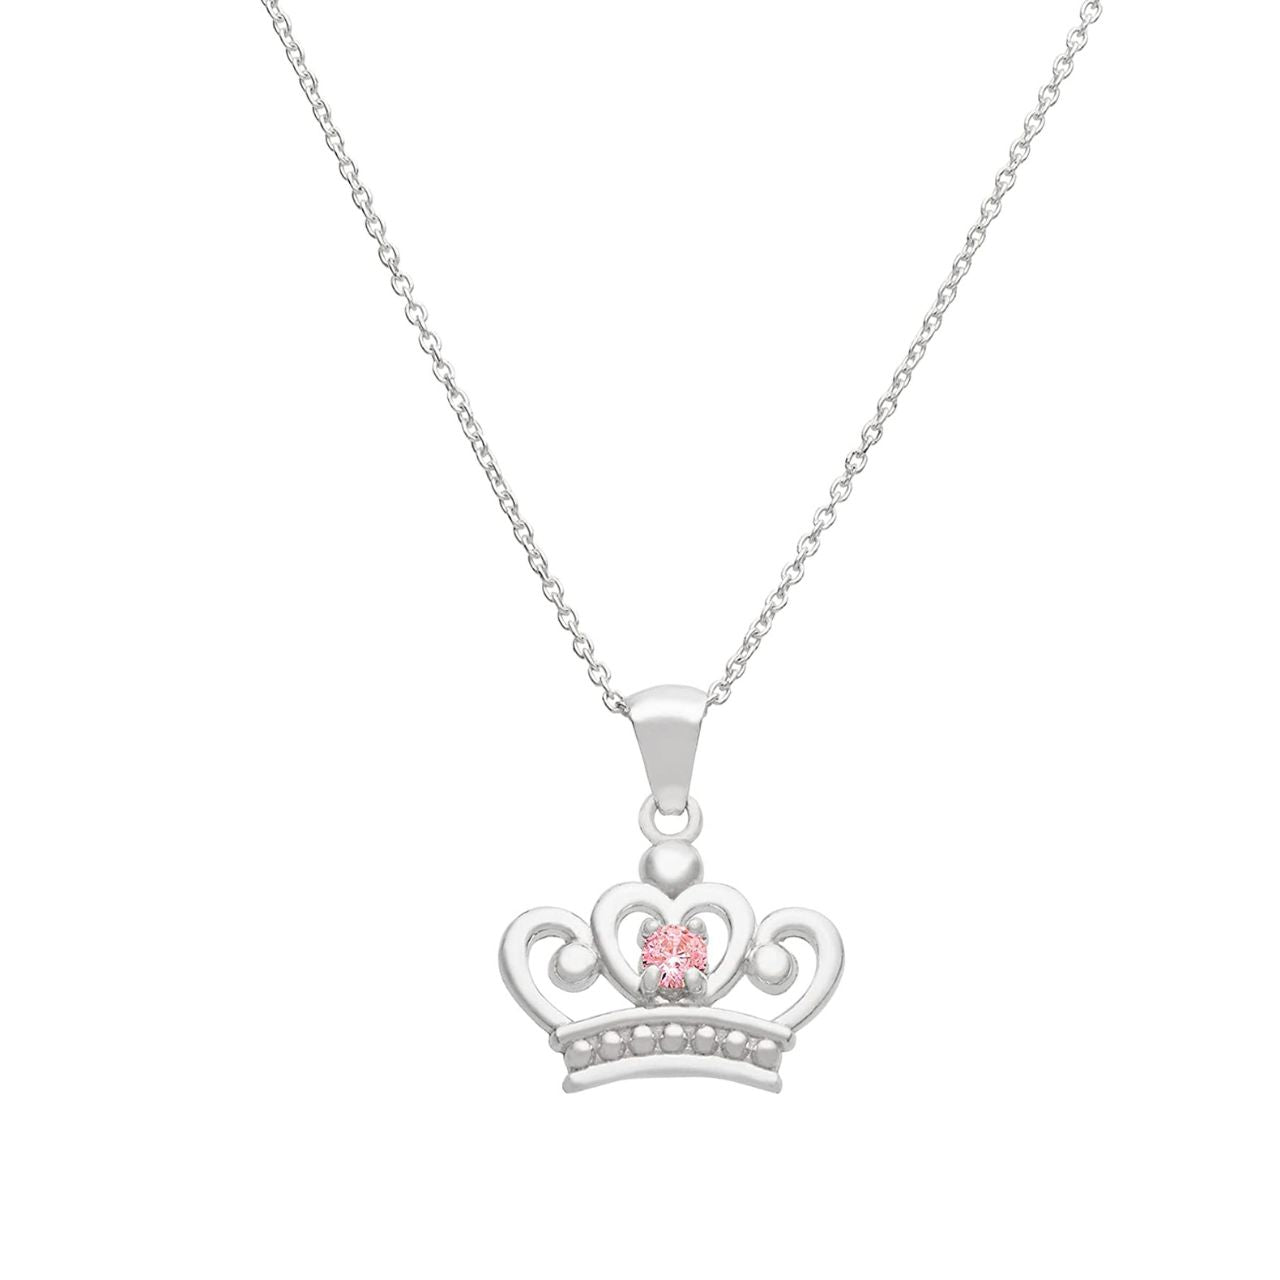 Disney Princess Silver Pink Crown Pendant with Pink Cubic Zirconia  Disney Princess Collection, this silver beautiful shiny crown pendant with a pink stone necklace adding a feminine touch to the Disney classic piece of Jewellery.  Trendy and fashionable design, the Disney Princess collection, sterling silver crown with pink crystal necklace will add a chic, fun touch to any outfit.